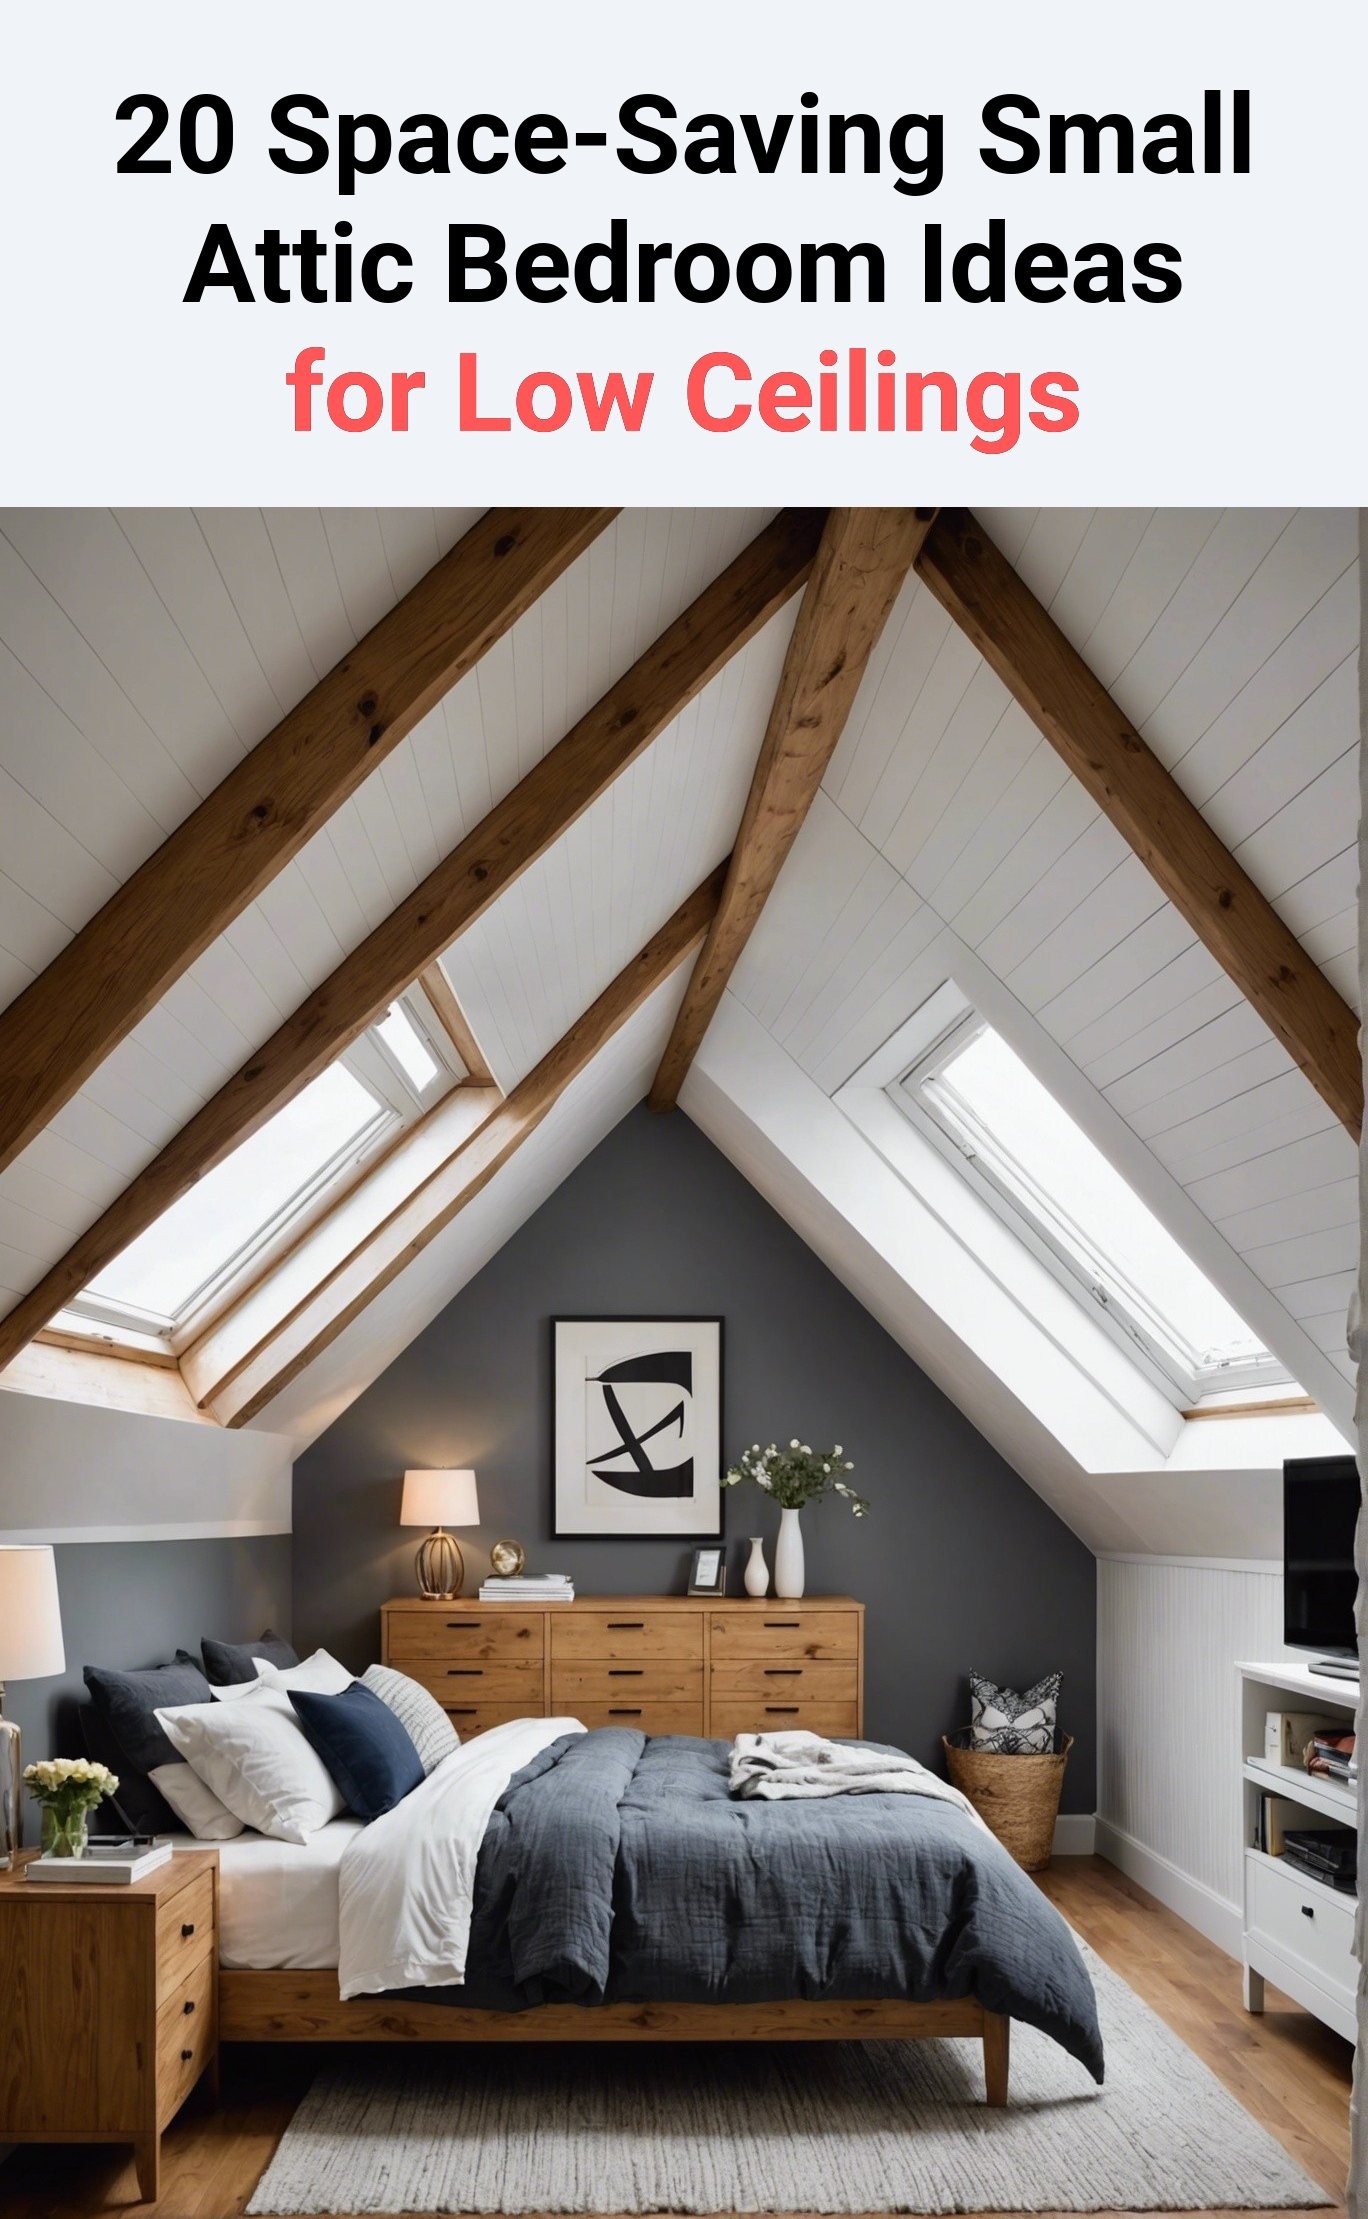 20 Space-Saving Small Attic Bedroom Ideas for Low Ceilings